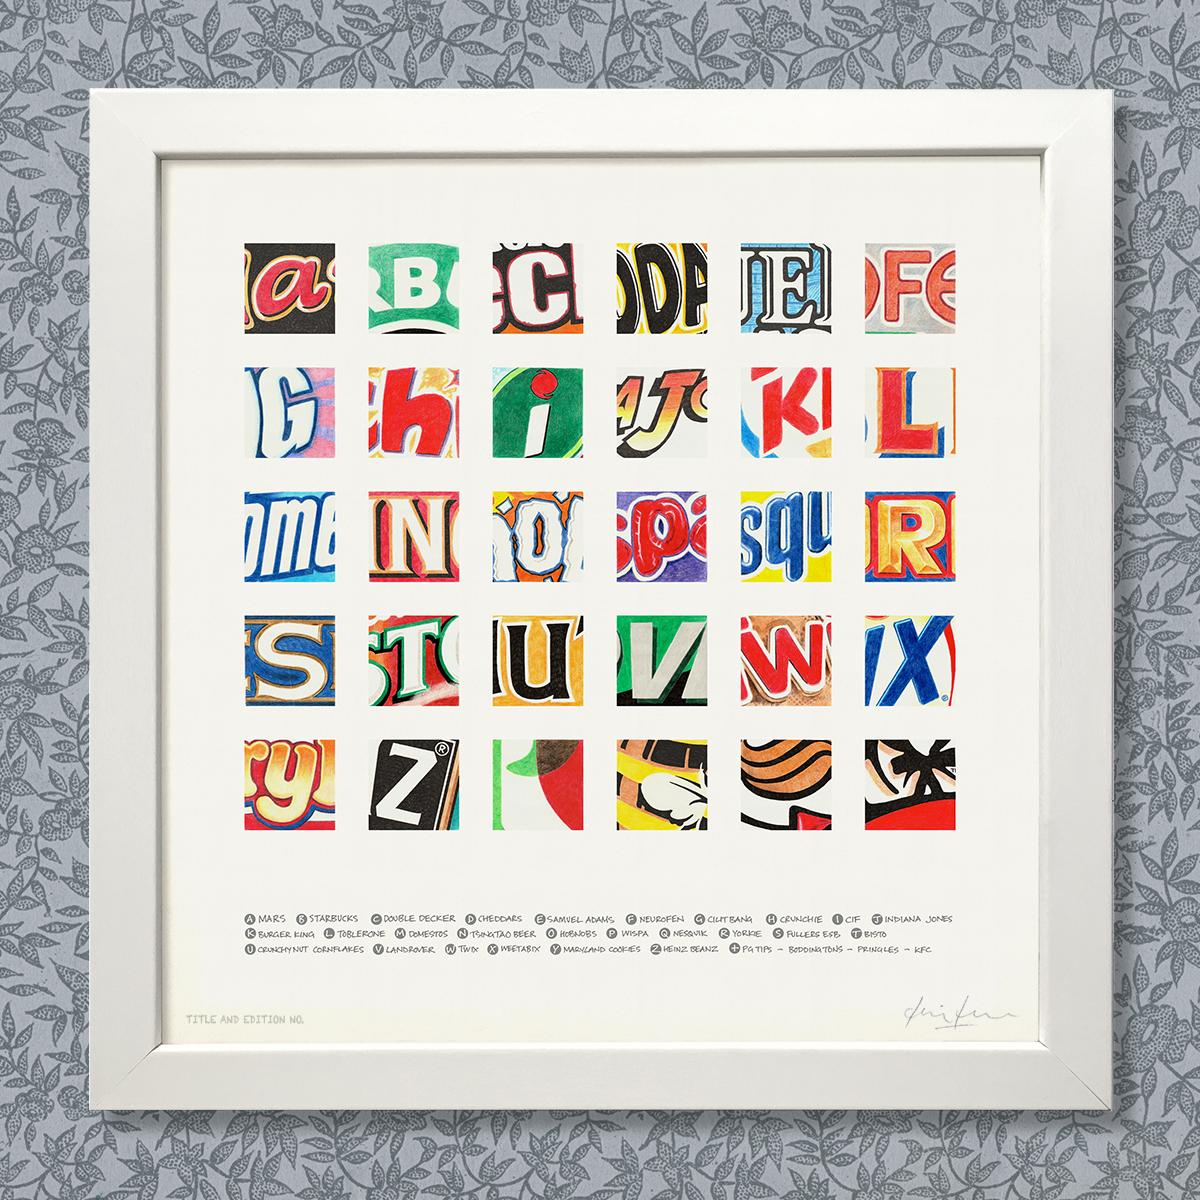 Limited edition print, a montage of letters from well-known brands in a white frame